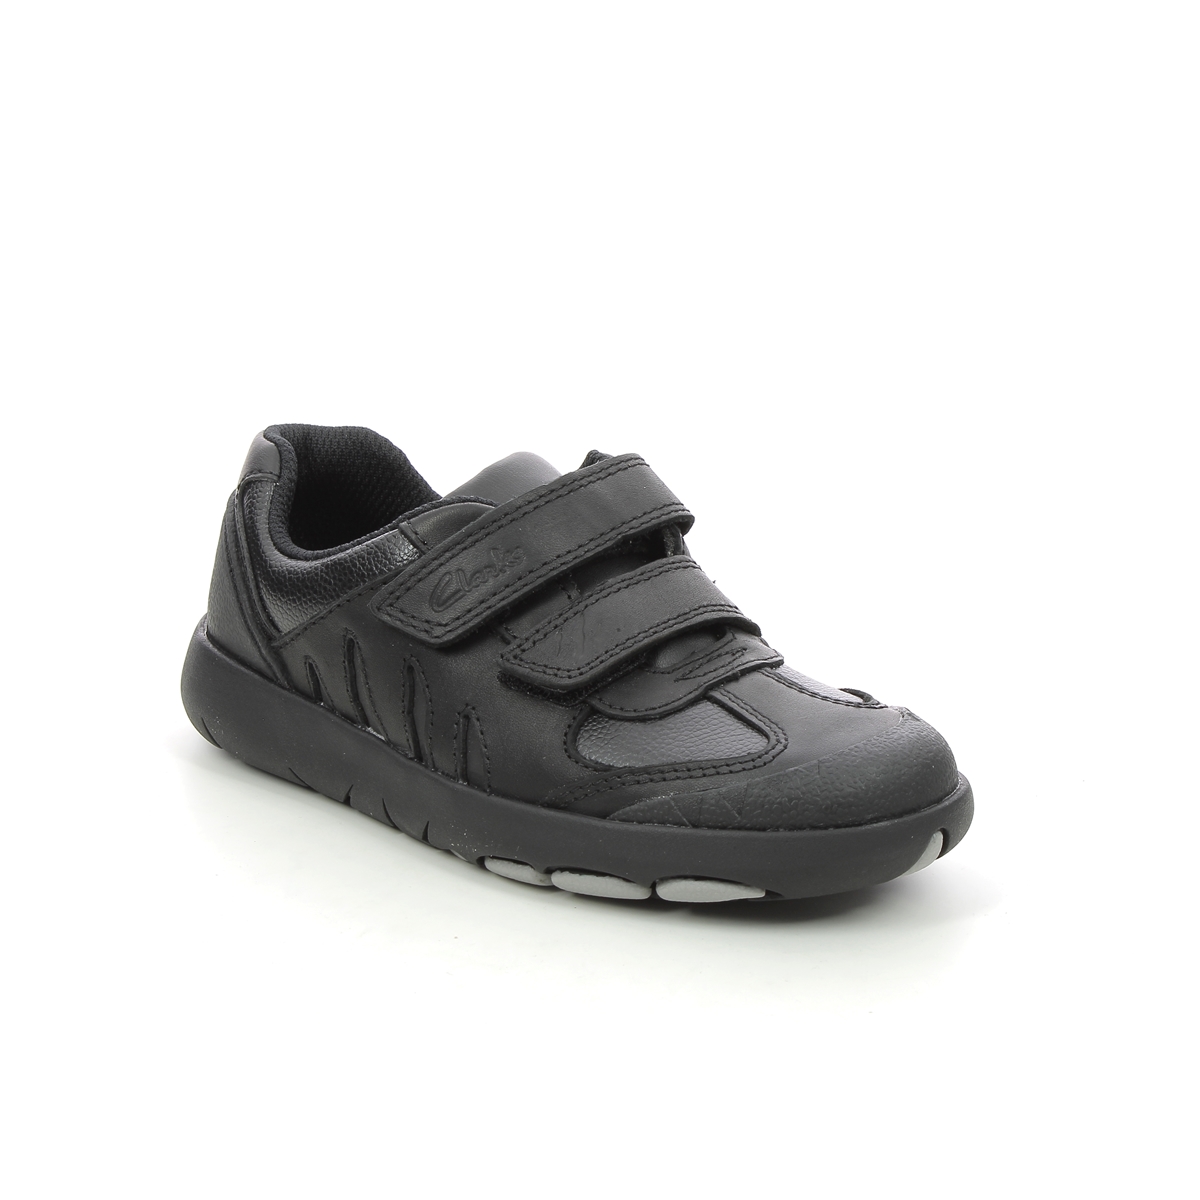 Clarks Rex Stride K Black Leather Kids Boys Shoes 626987G In Size 13.5 In Plain Black Leather G Width Fitting For School For kids